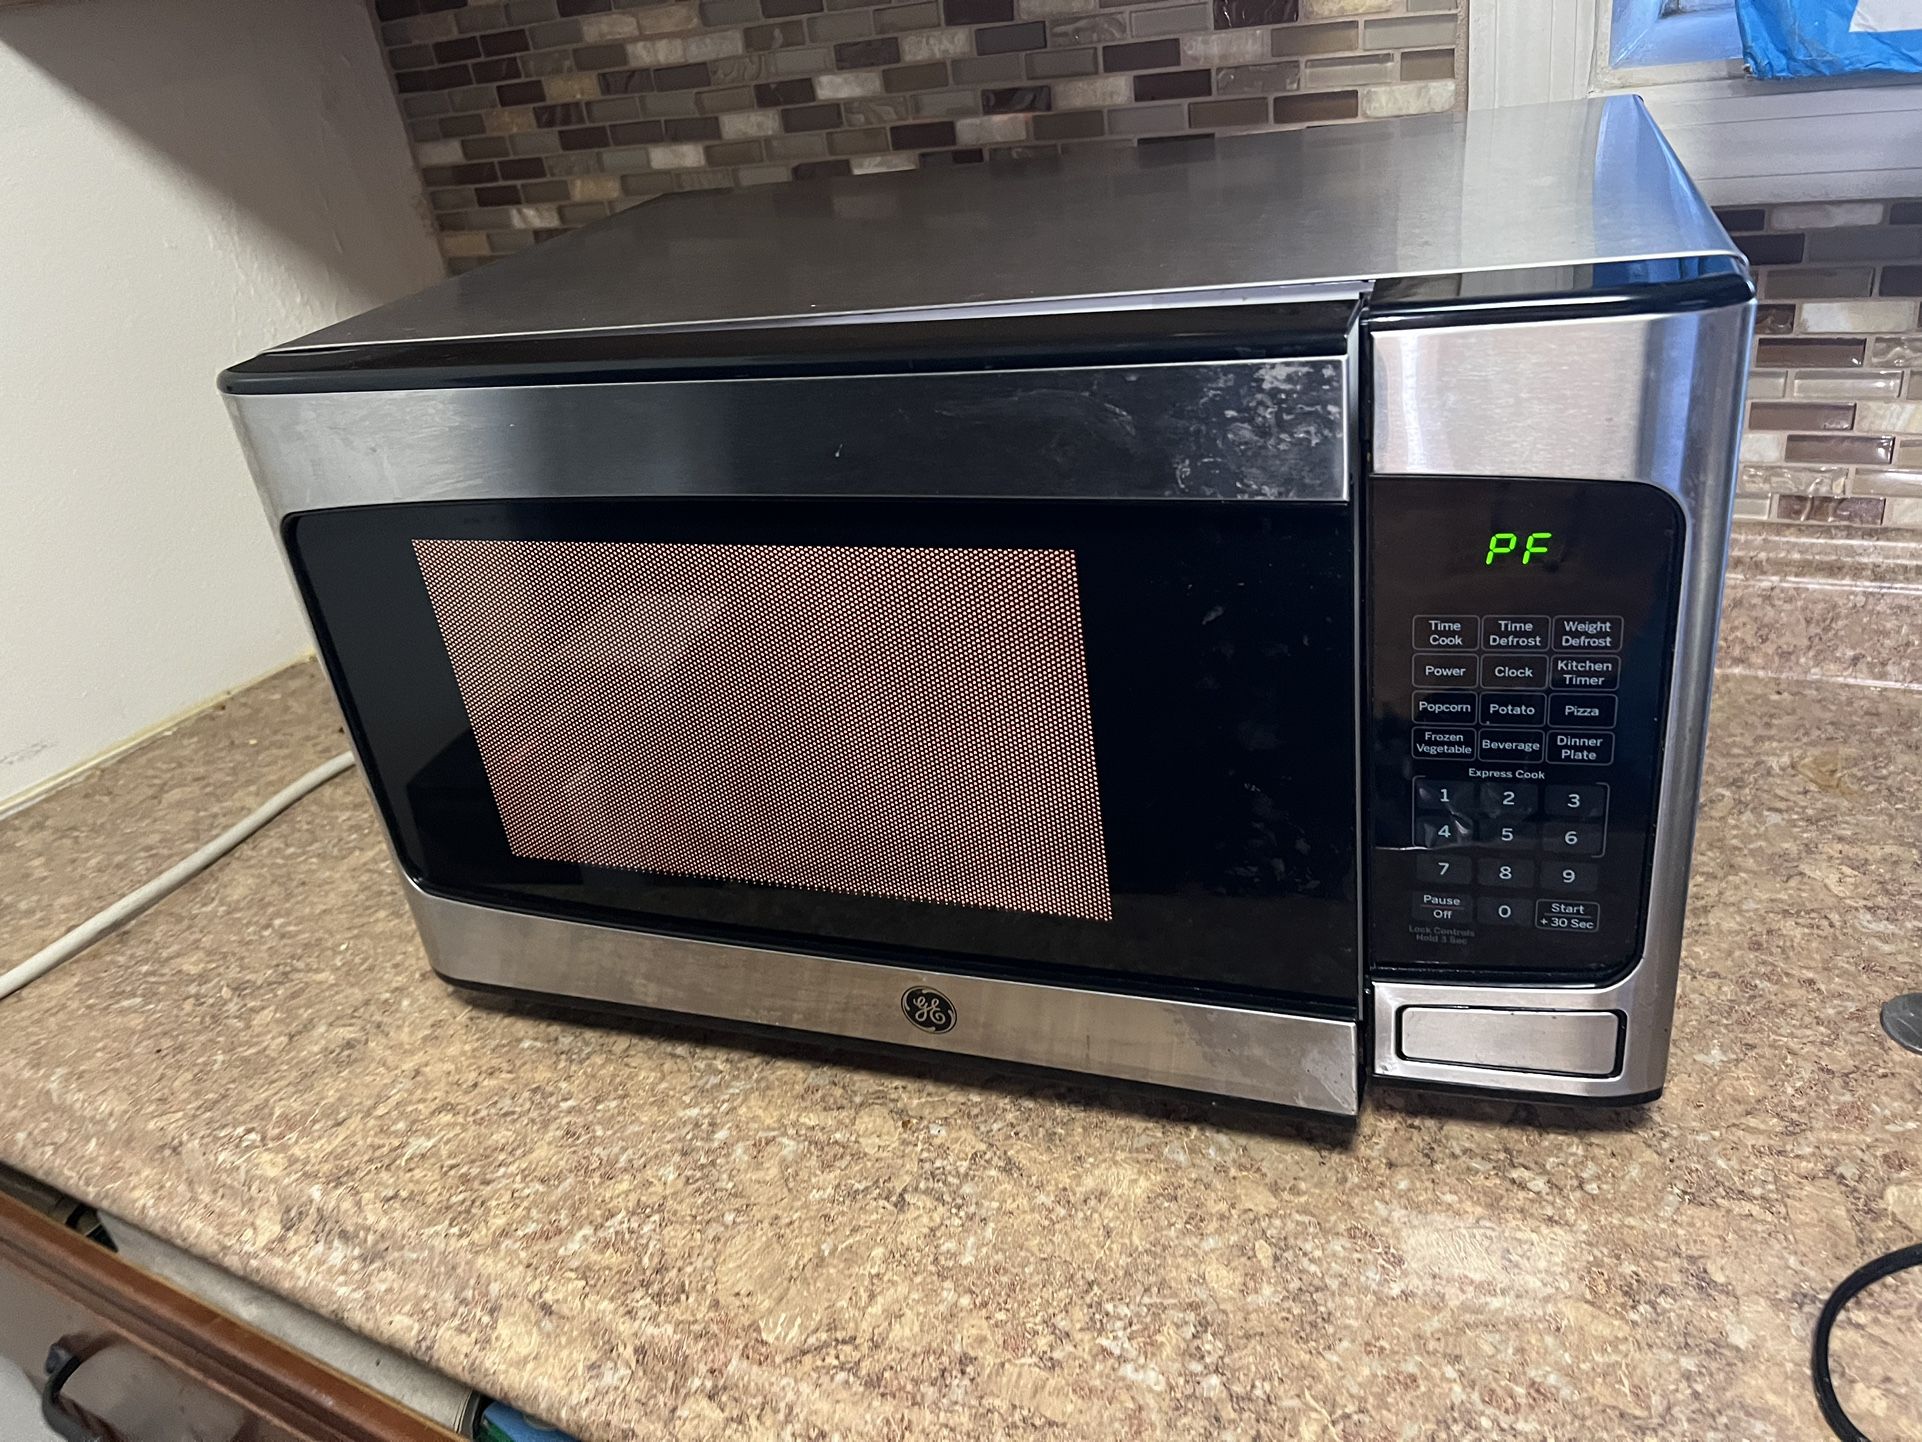 Comfee Microwave for Sale in Union City, NJ - OfferUp